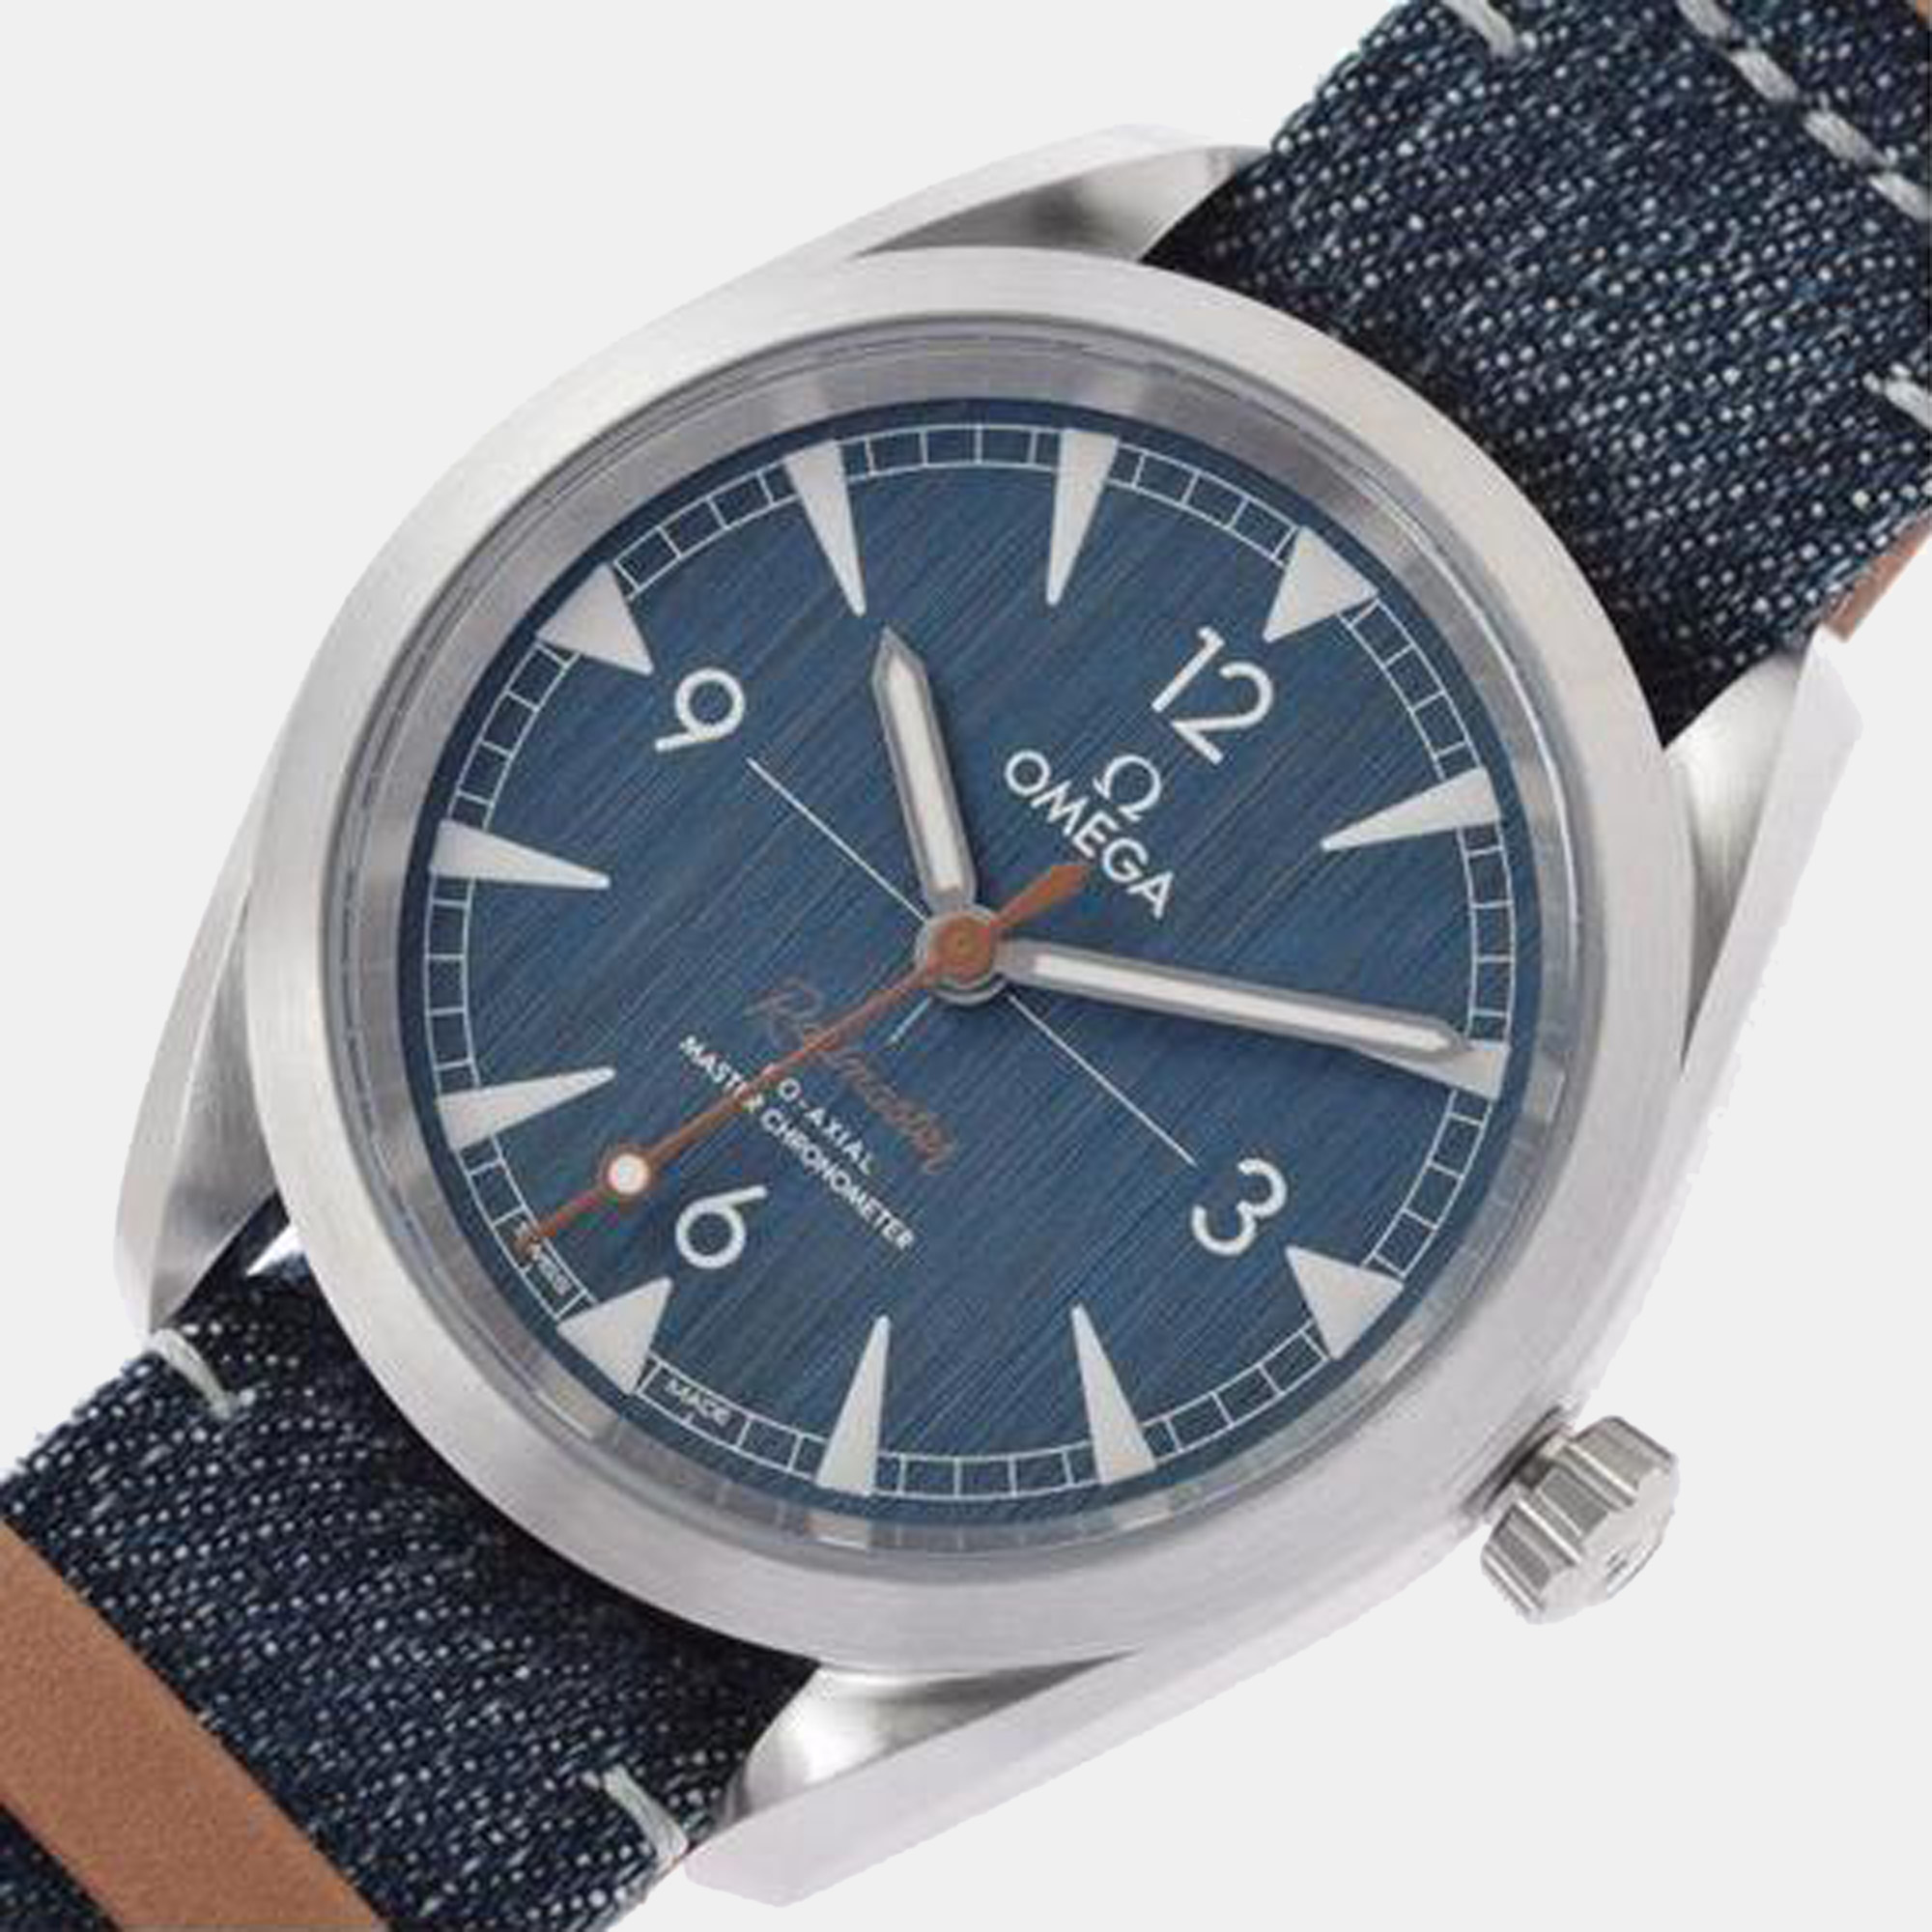 

Omega Blue Stainless Steel Railmaster 220.12.40.20.03.001 Automatic Men's Wristwatch 40 mm